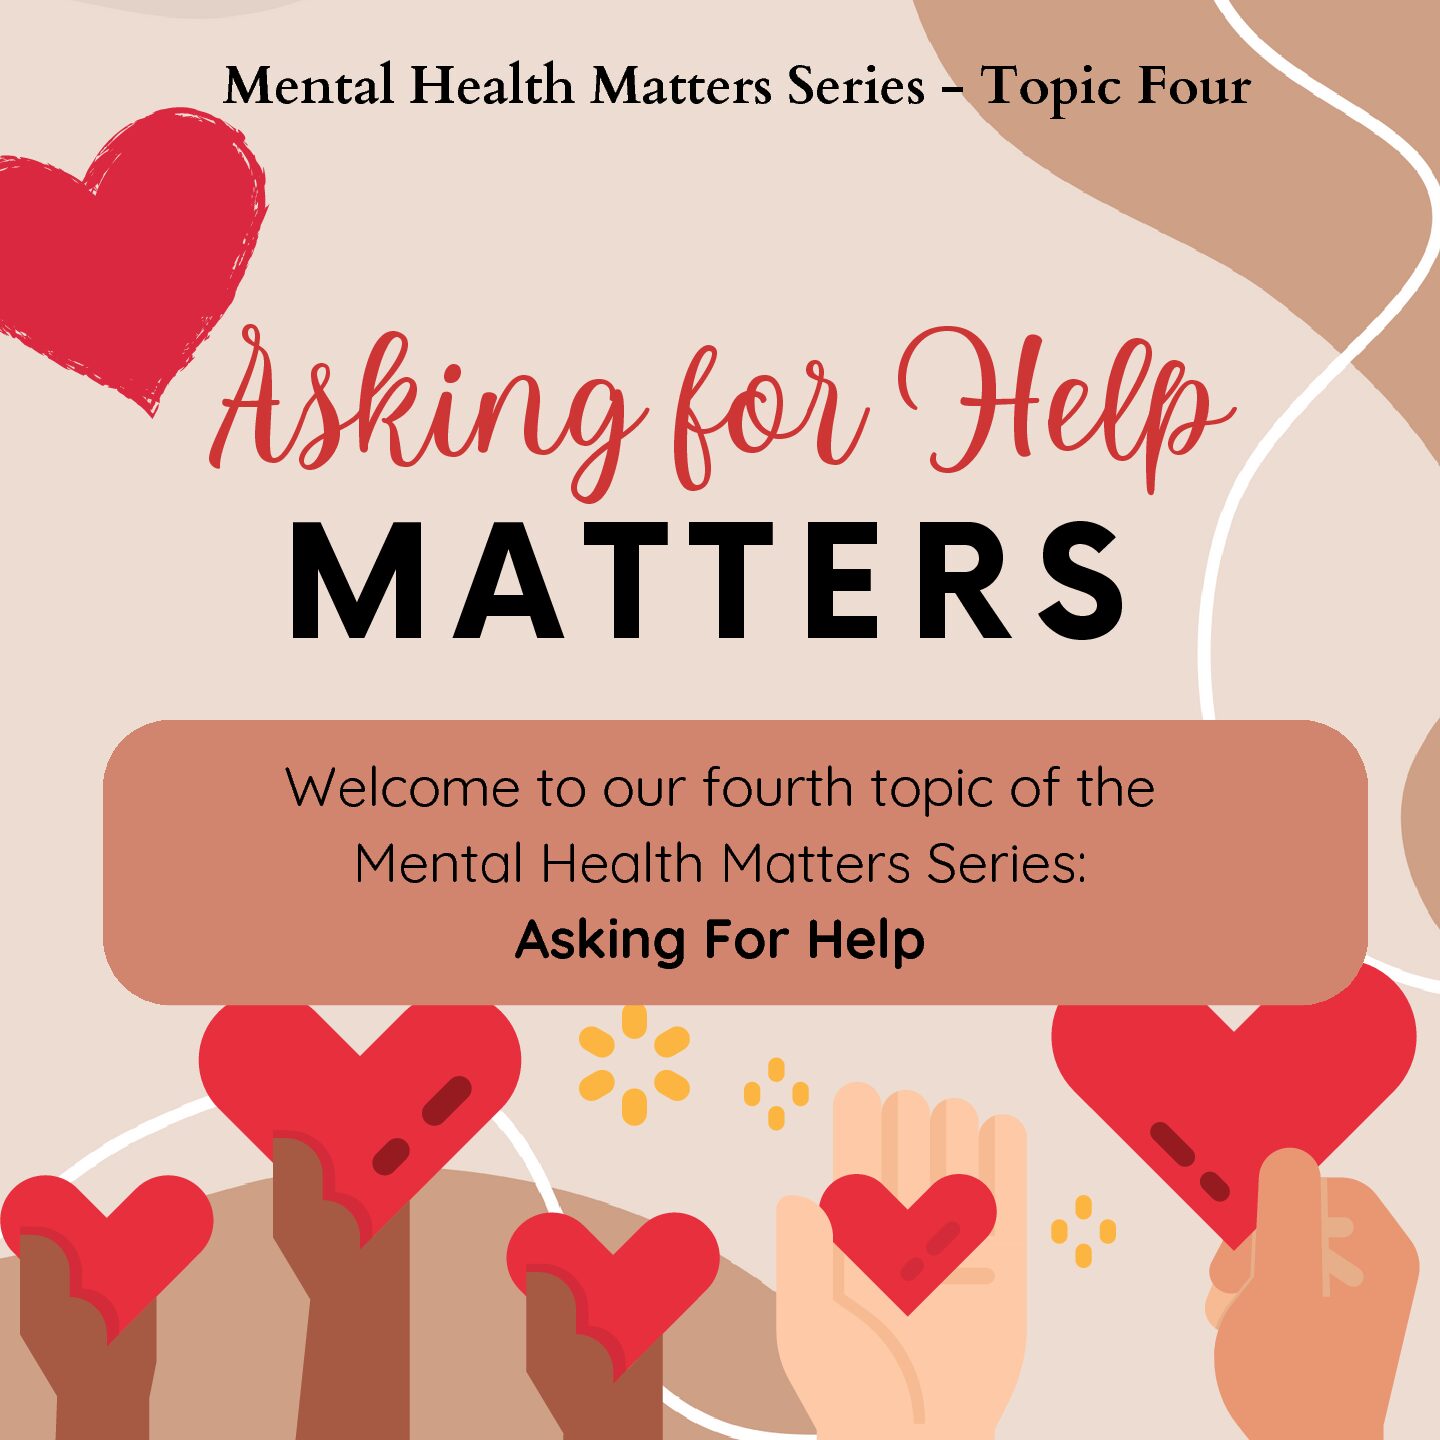 Mental Health Matters Series: Asking for Help Matters